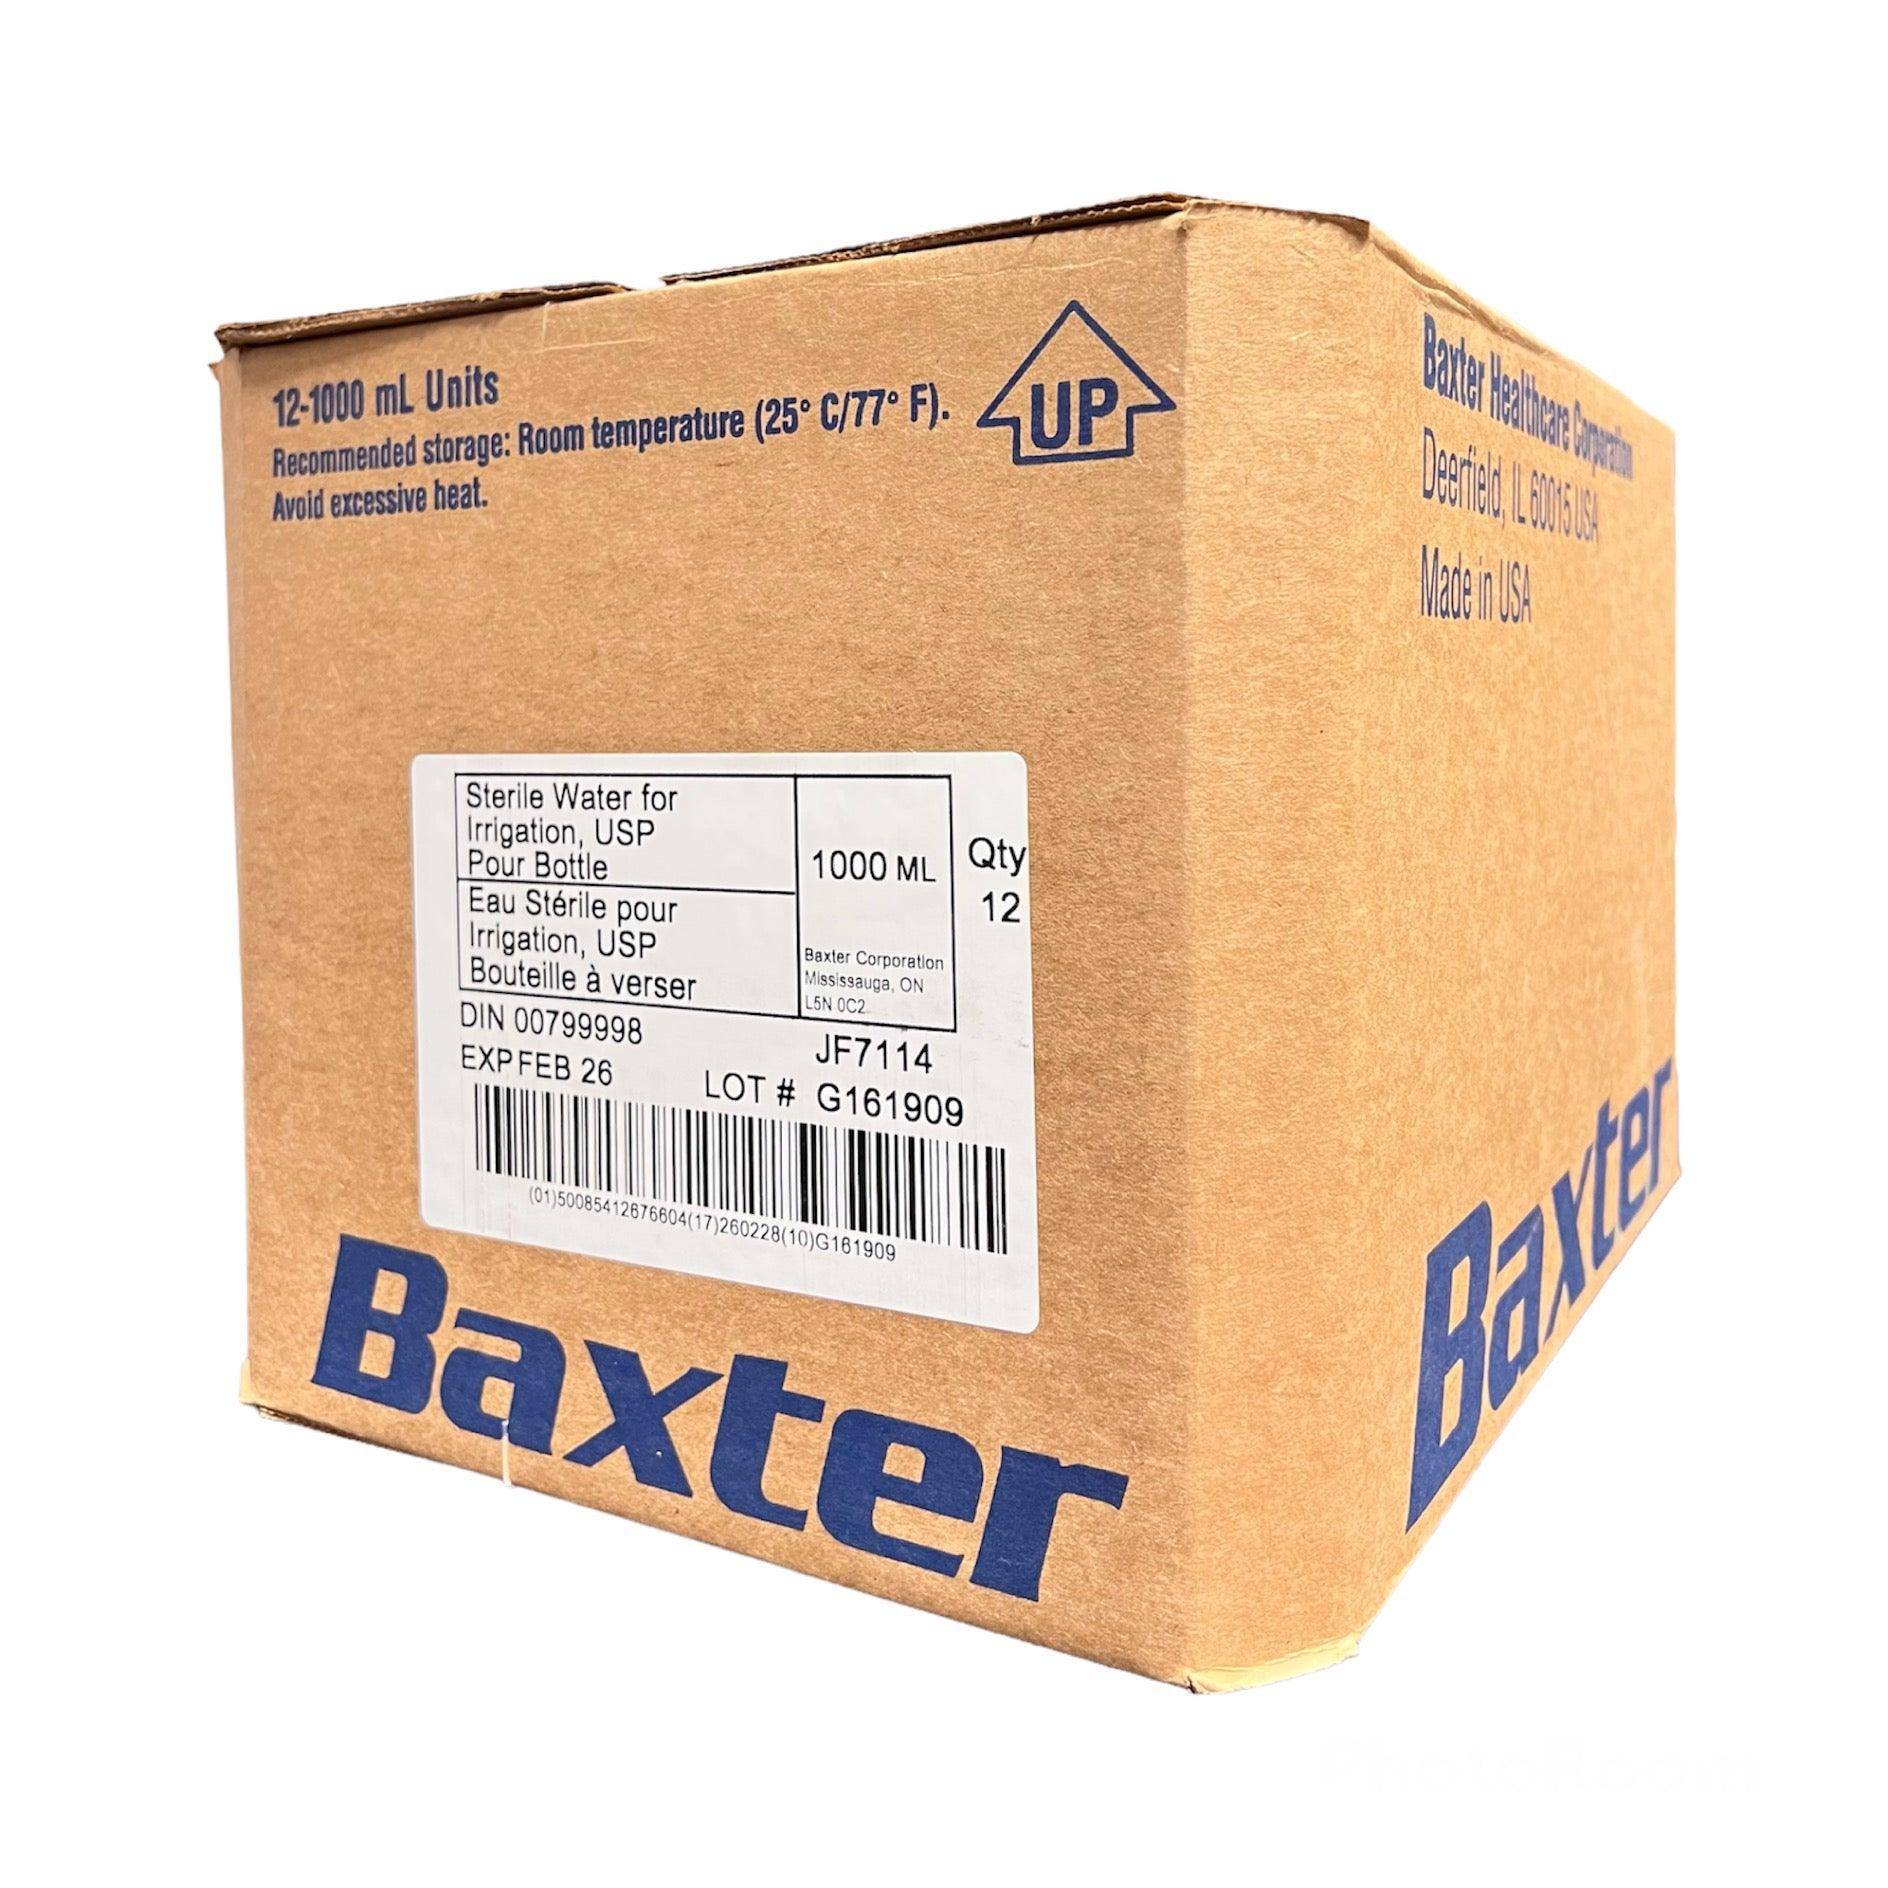 Baxter - Sterile Water for Irrigation USP 1000ml Pour Bottle - JF7114